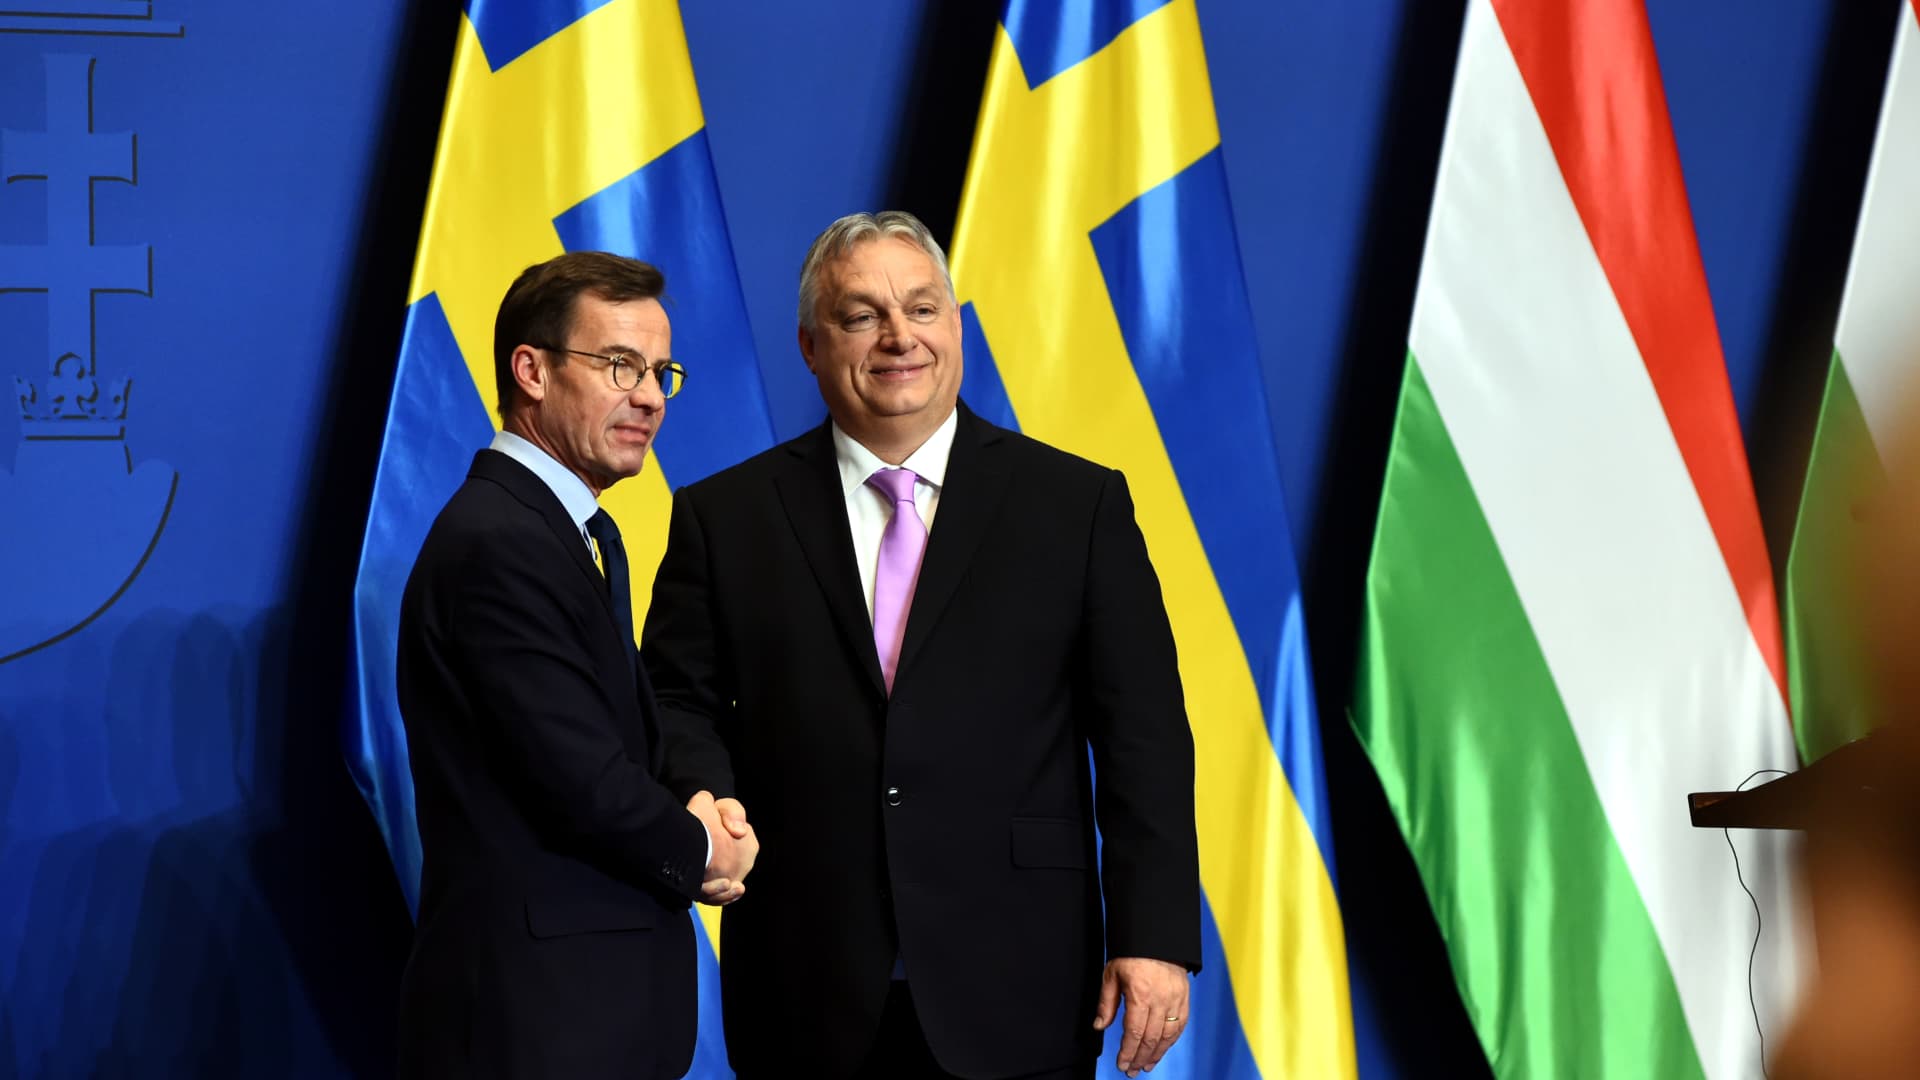 Hungary votes to approve Sweden's NATO membership